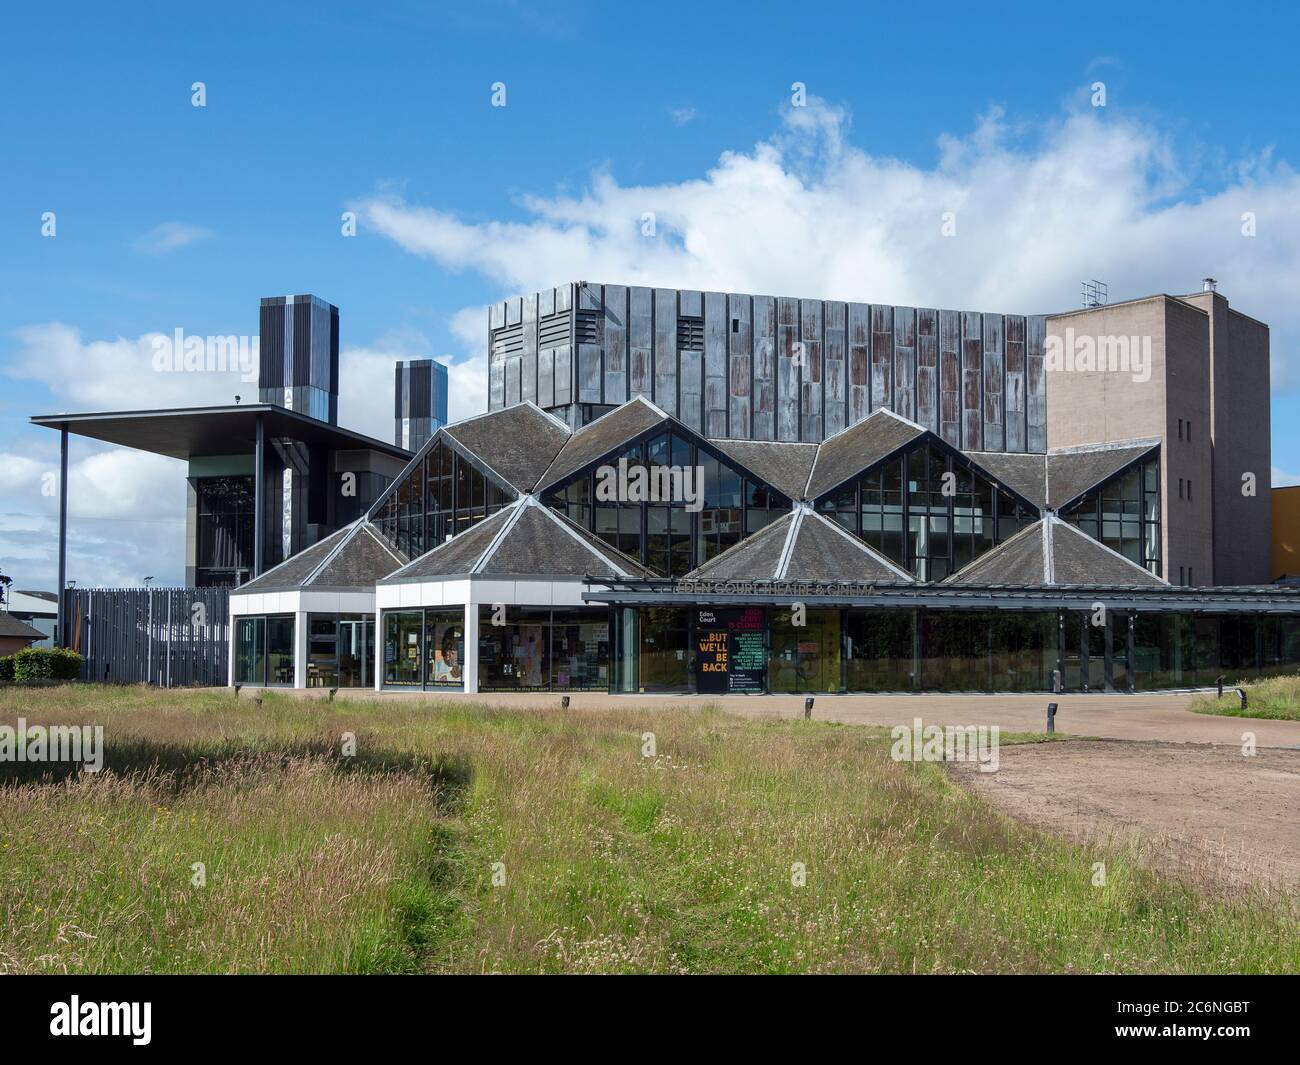 Eden Court Theatre closed during Covid-19 lockdown, Inverness, Highland, Scotland. Building seen with overgrown grass. Stock Photo